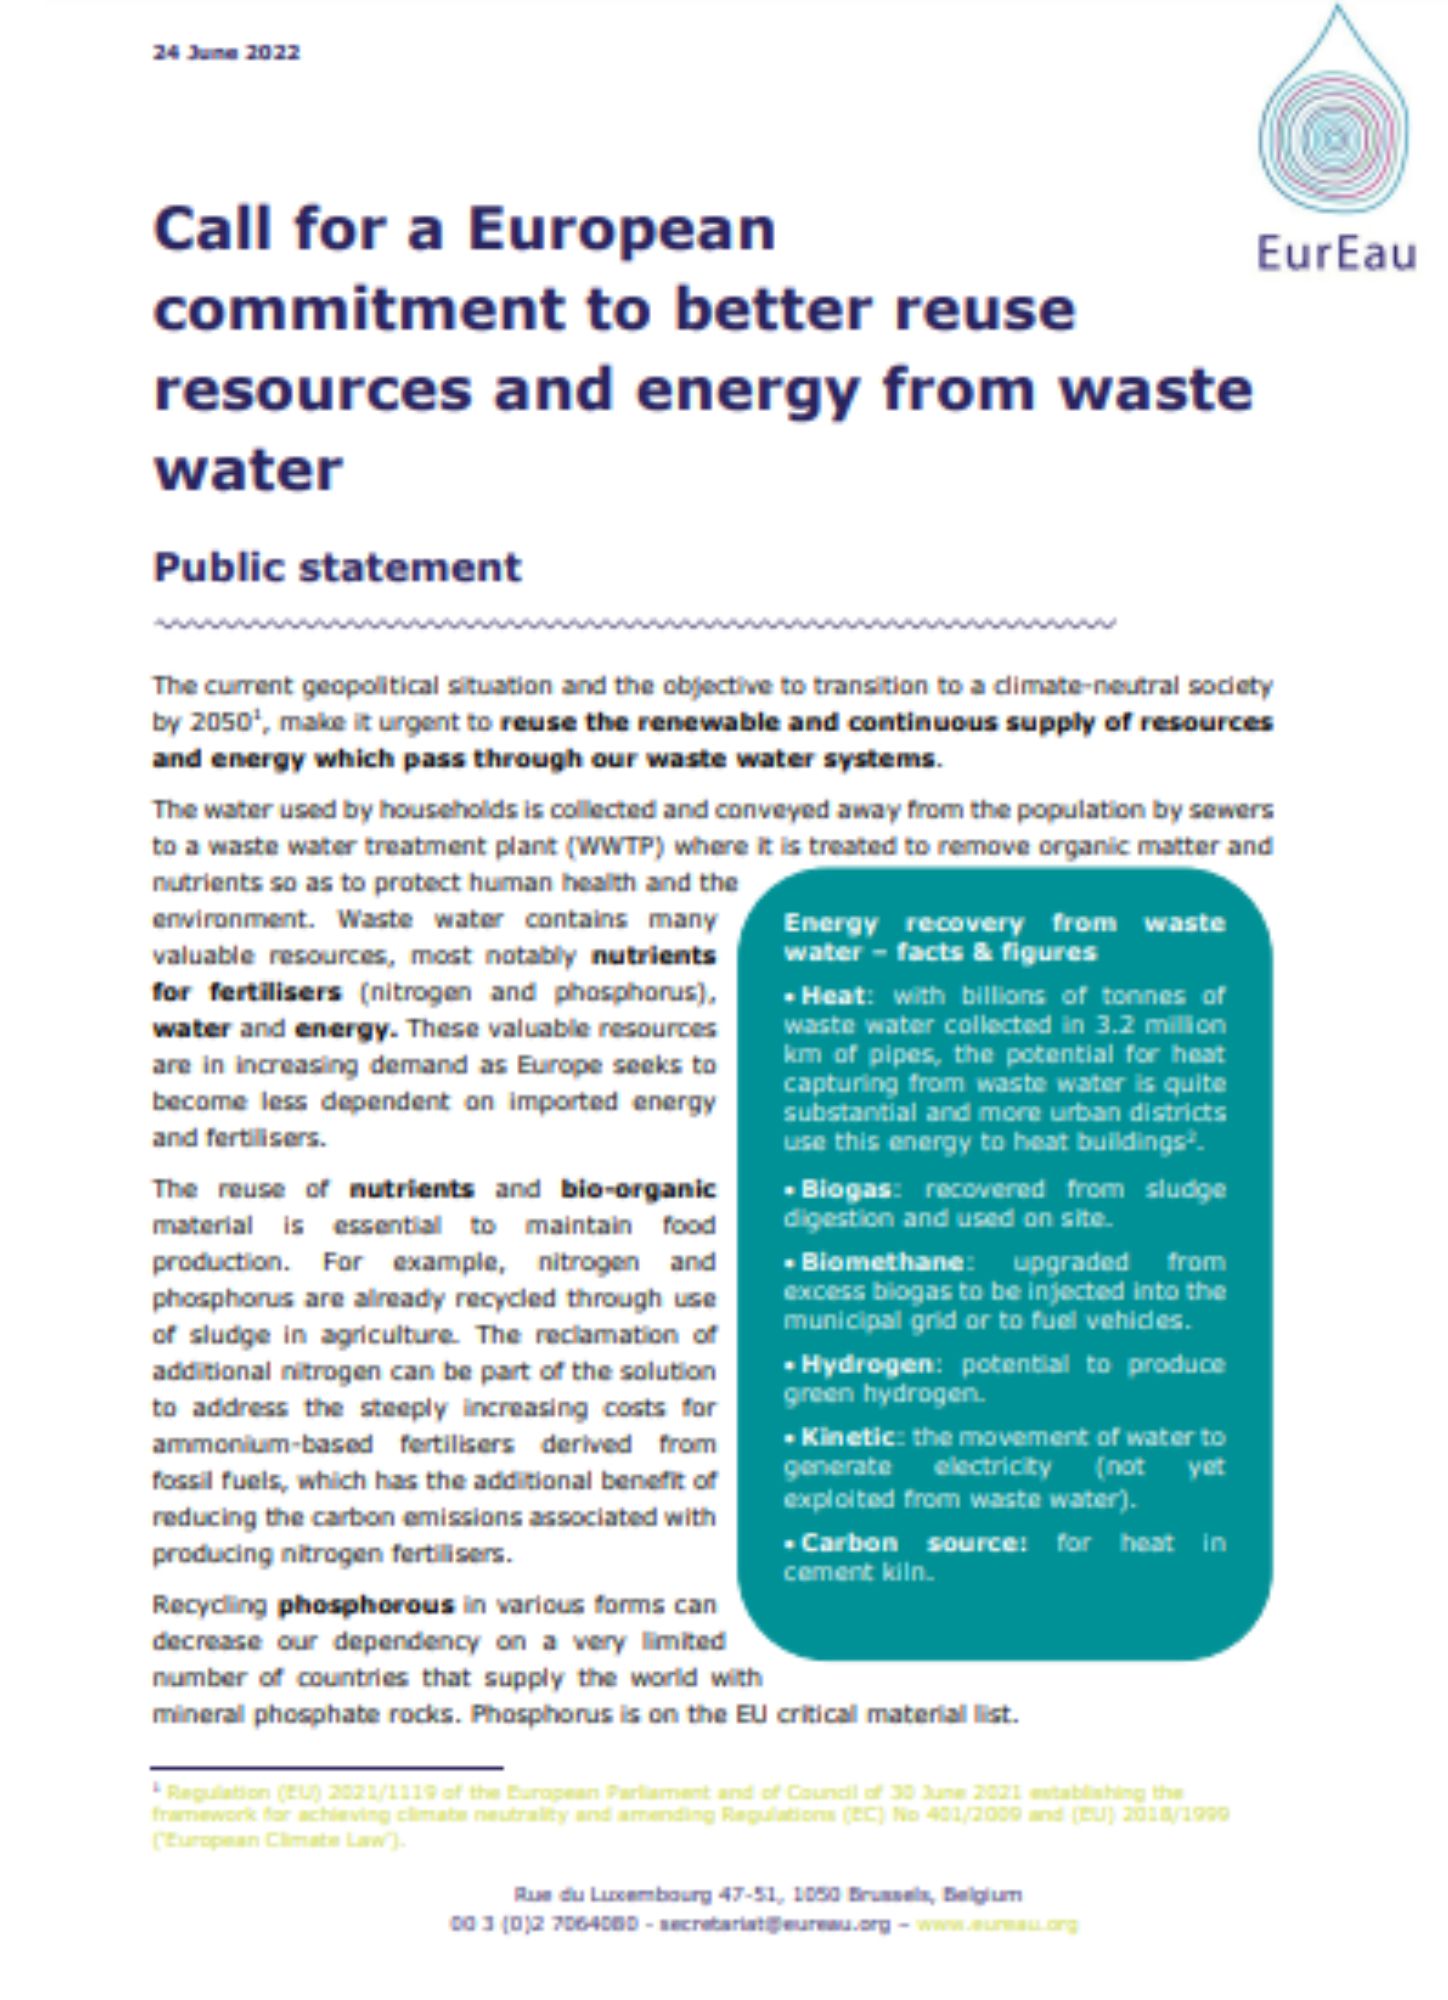 Public statement - Call for a European commitment to better utilise resources and energy from waste water